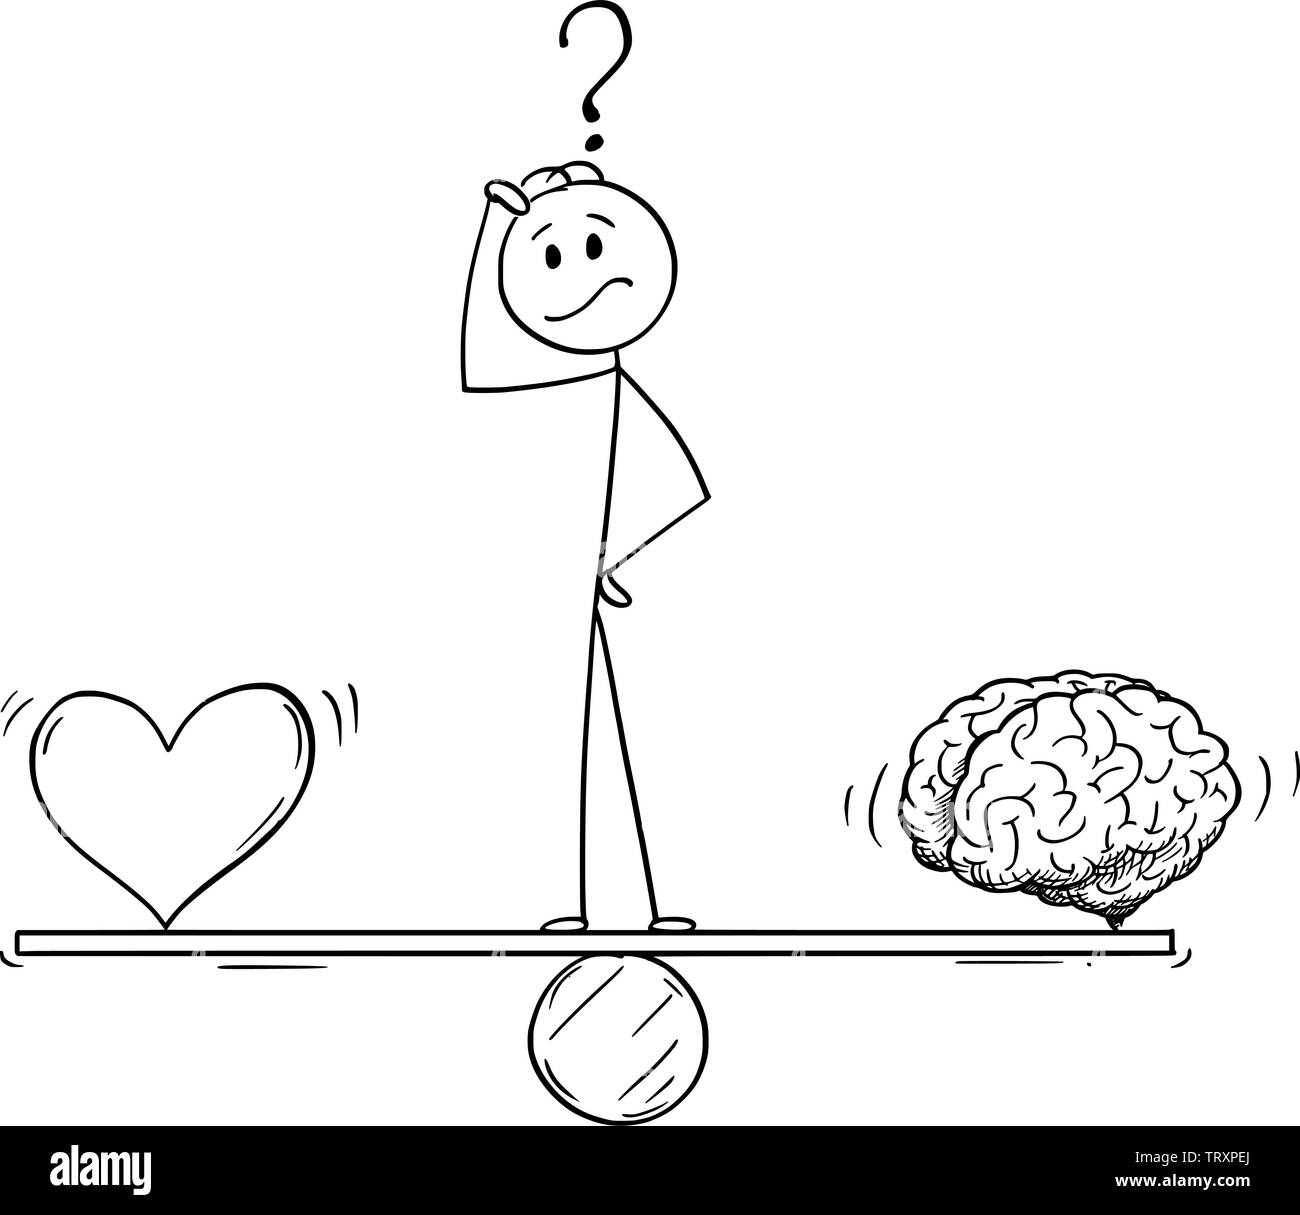 Vector cartoon stick figure drawing conceptual illustration of man or businessman thinking and standing on seesaw and balancing heart and brain as emotion and logic metaphor. Stock Vector